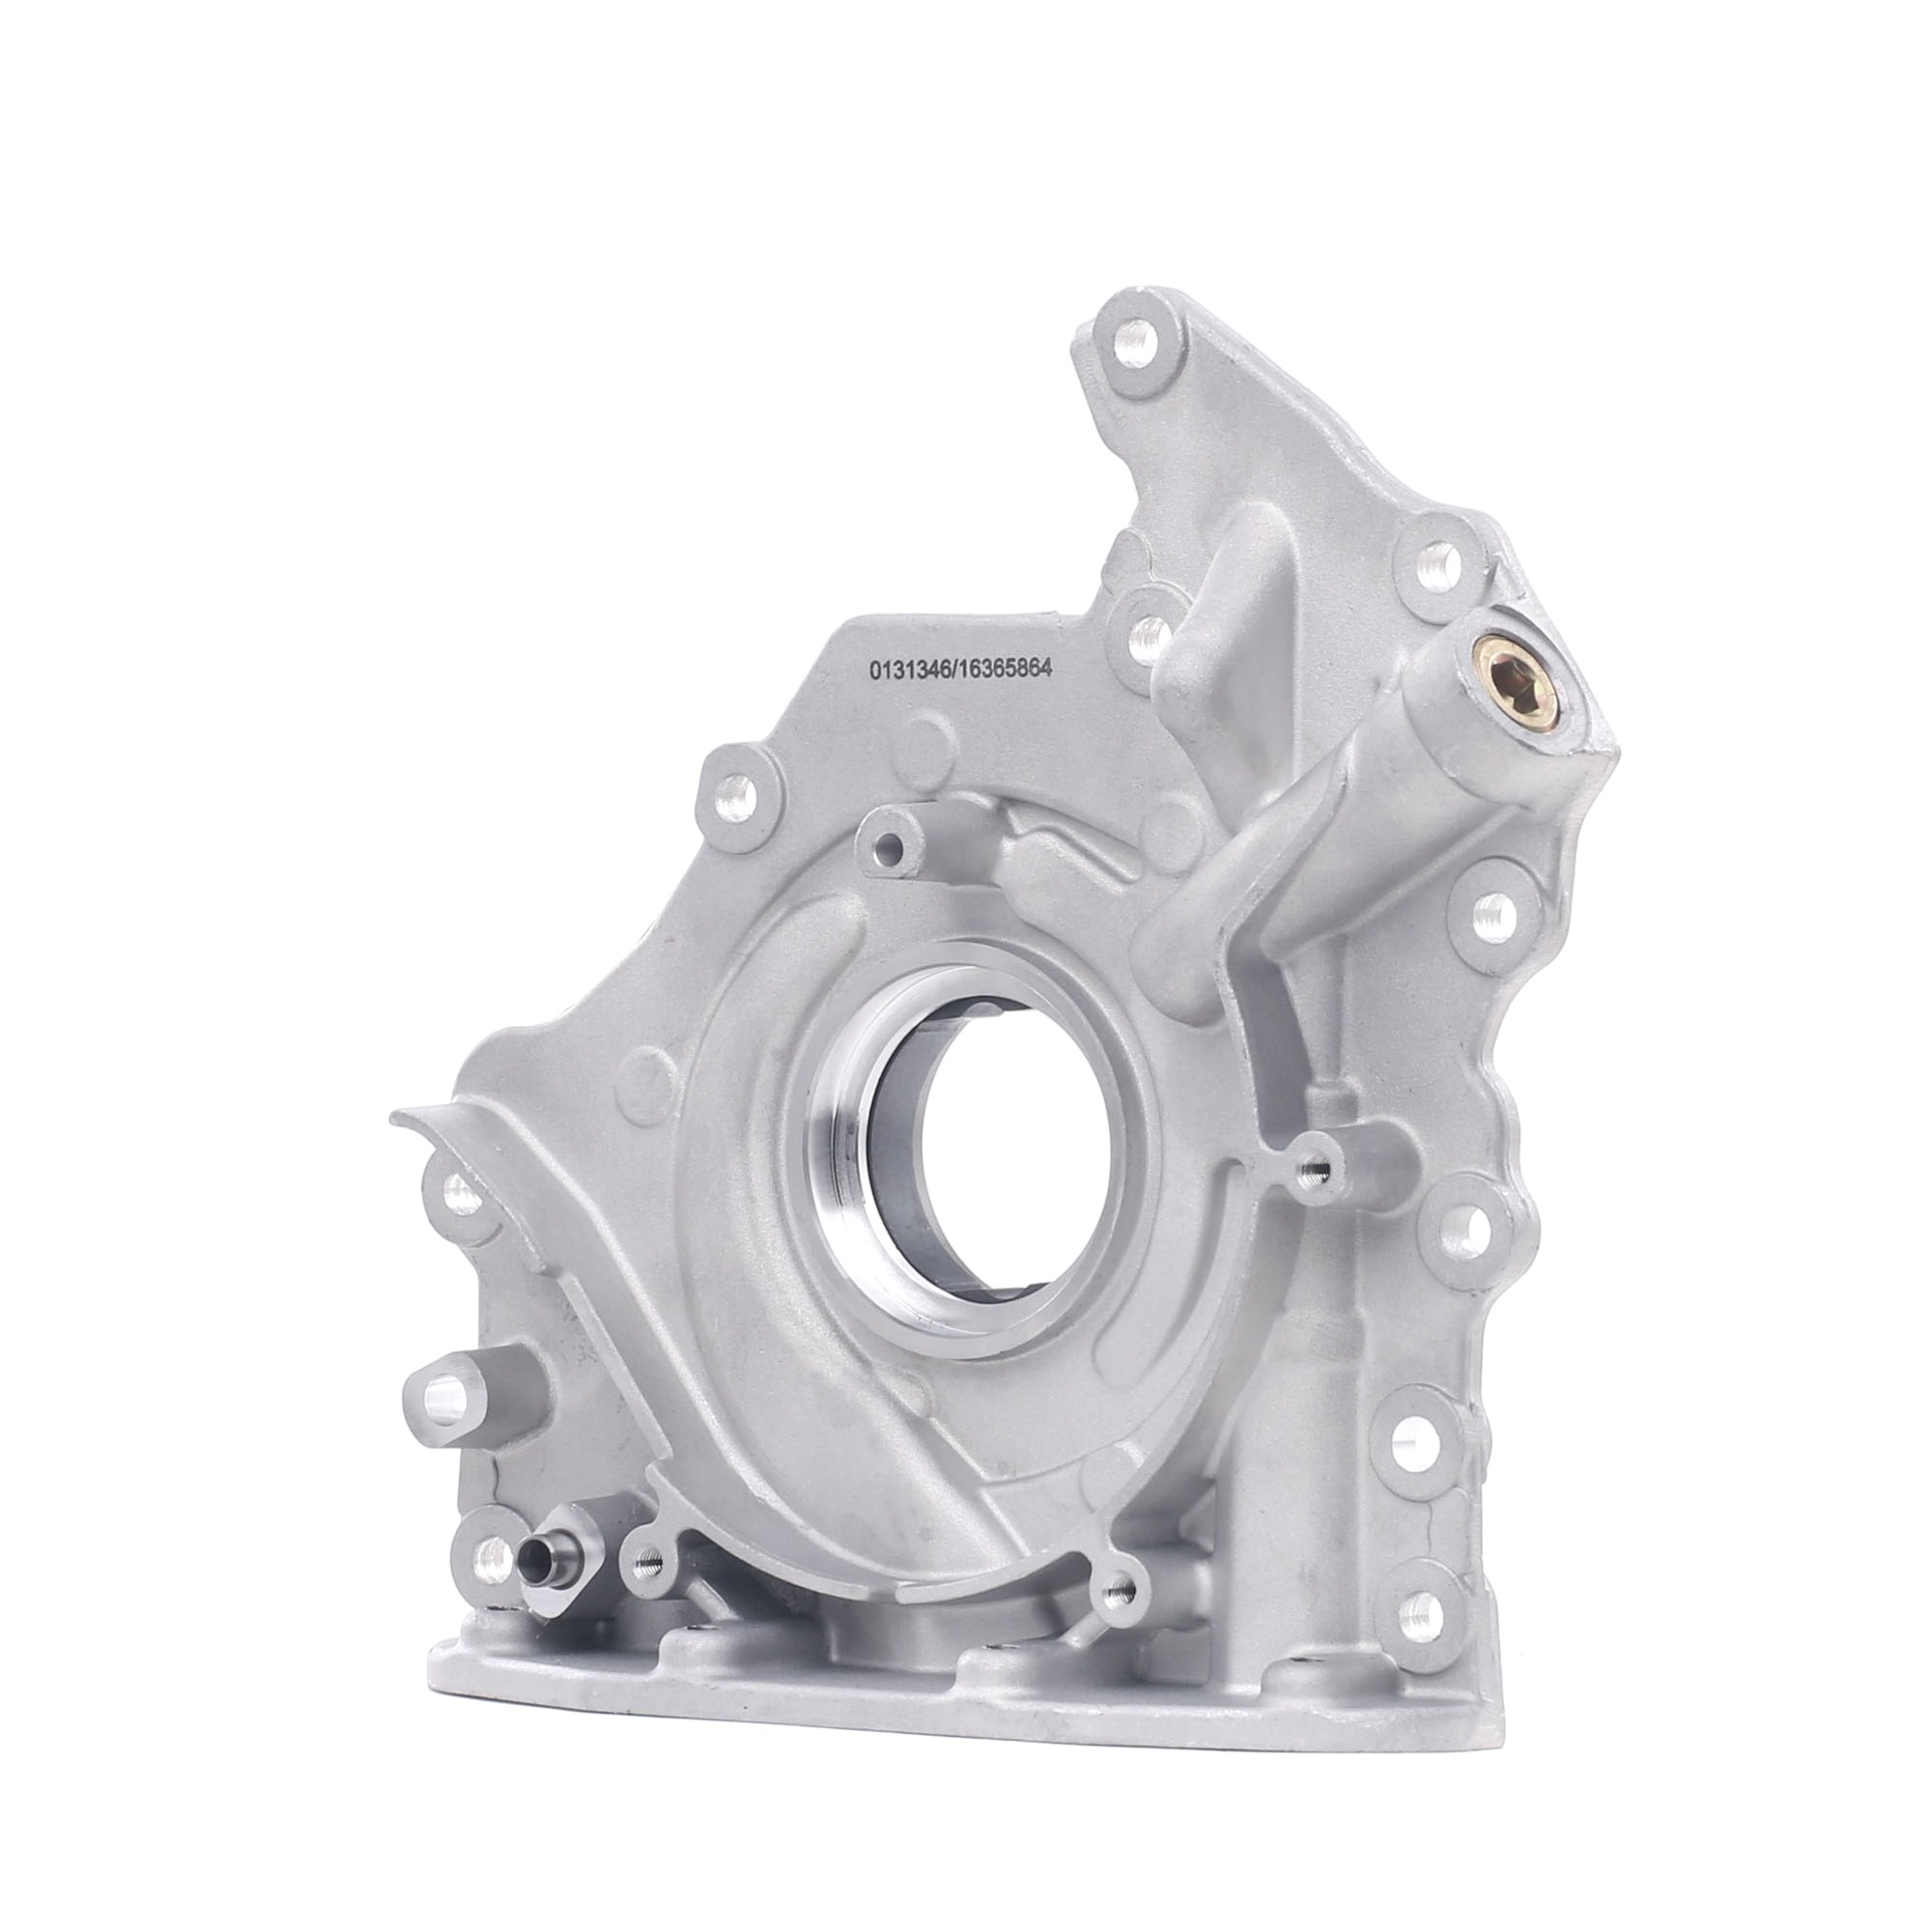 STARK SKOPM-1700102 Oil Pump with seal ring, with shaft seal